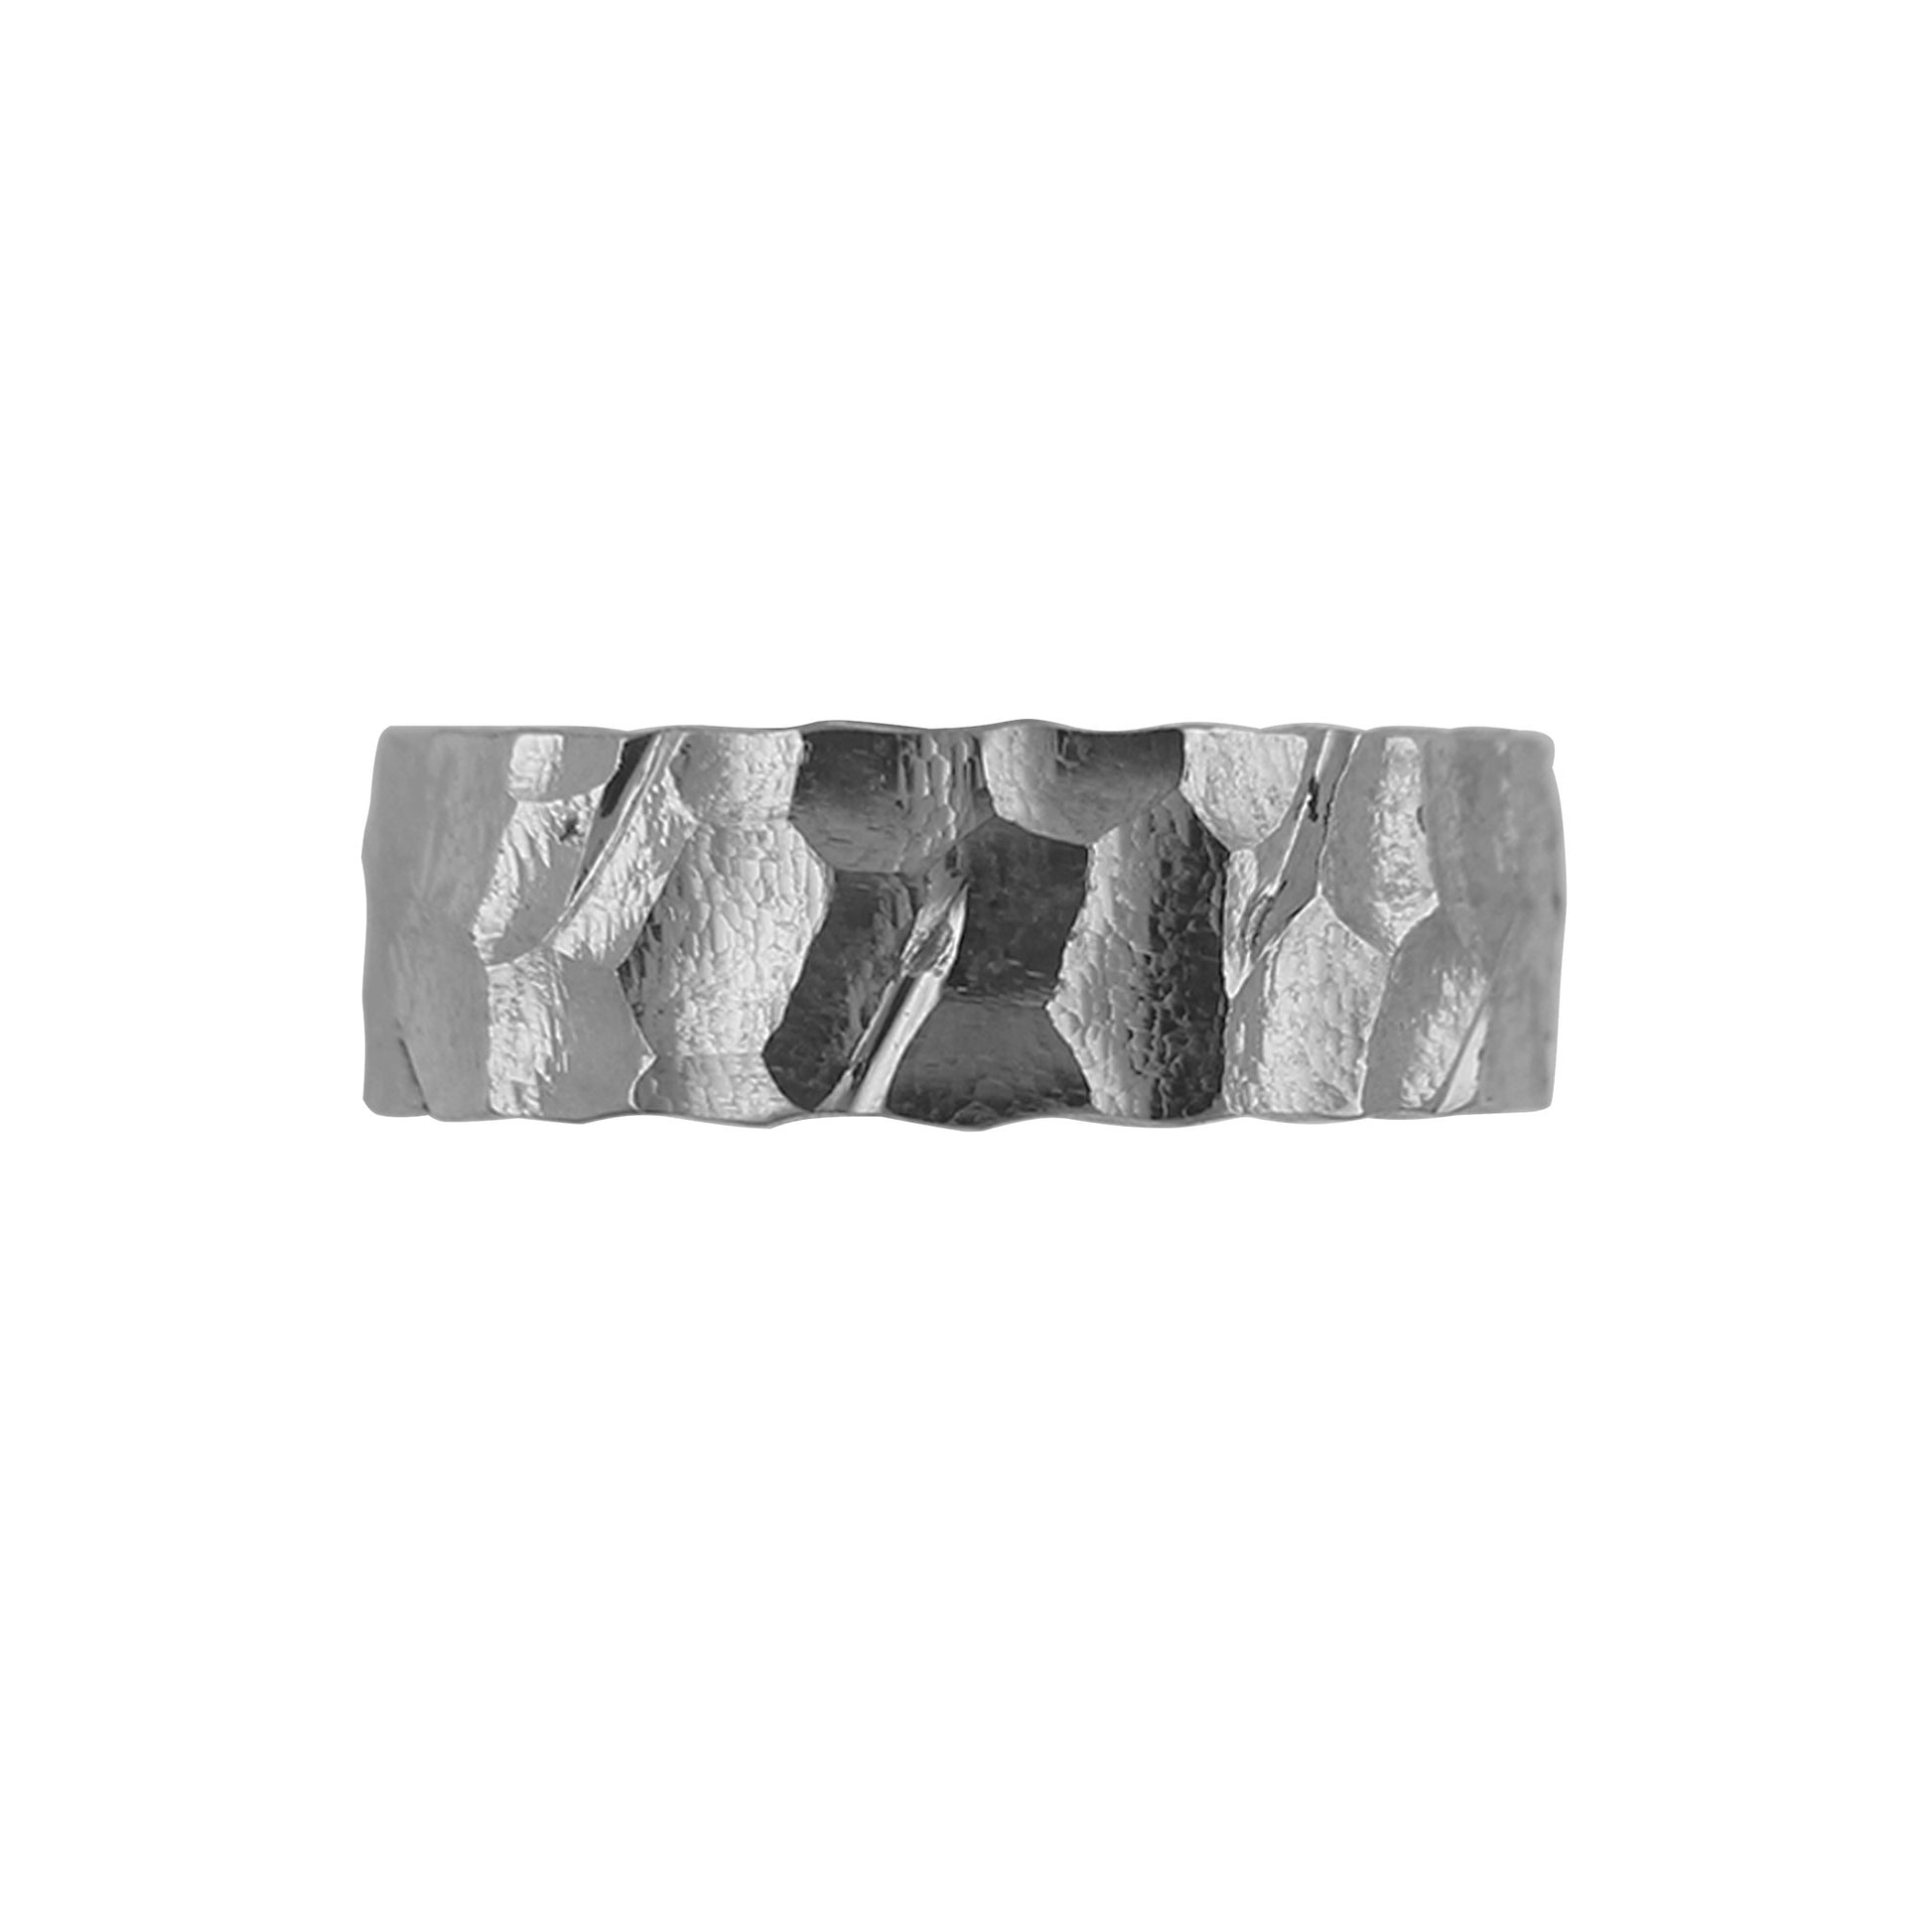 Tantalum Ring w/o min. Boundary/Polished(Cut). Tantalum ring with rock-like texture. Ring profile: width: 8.0 mm || height: 2.5 mm. Top view.